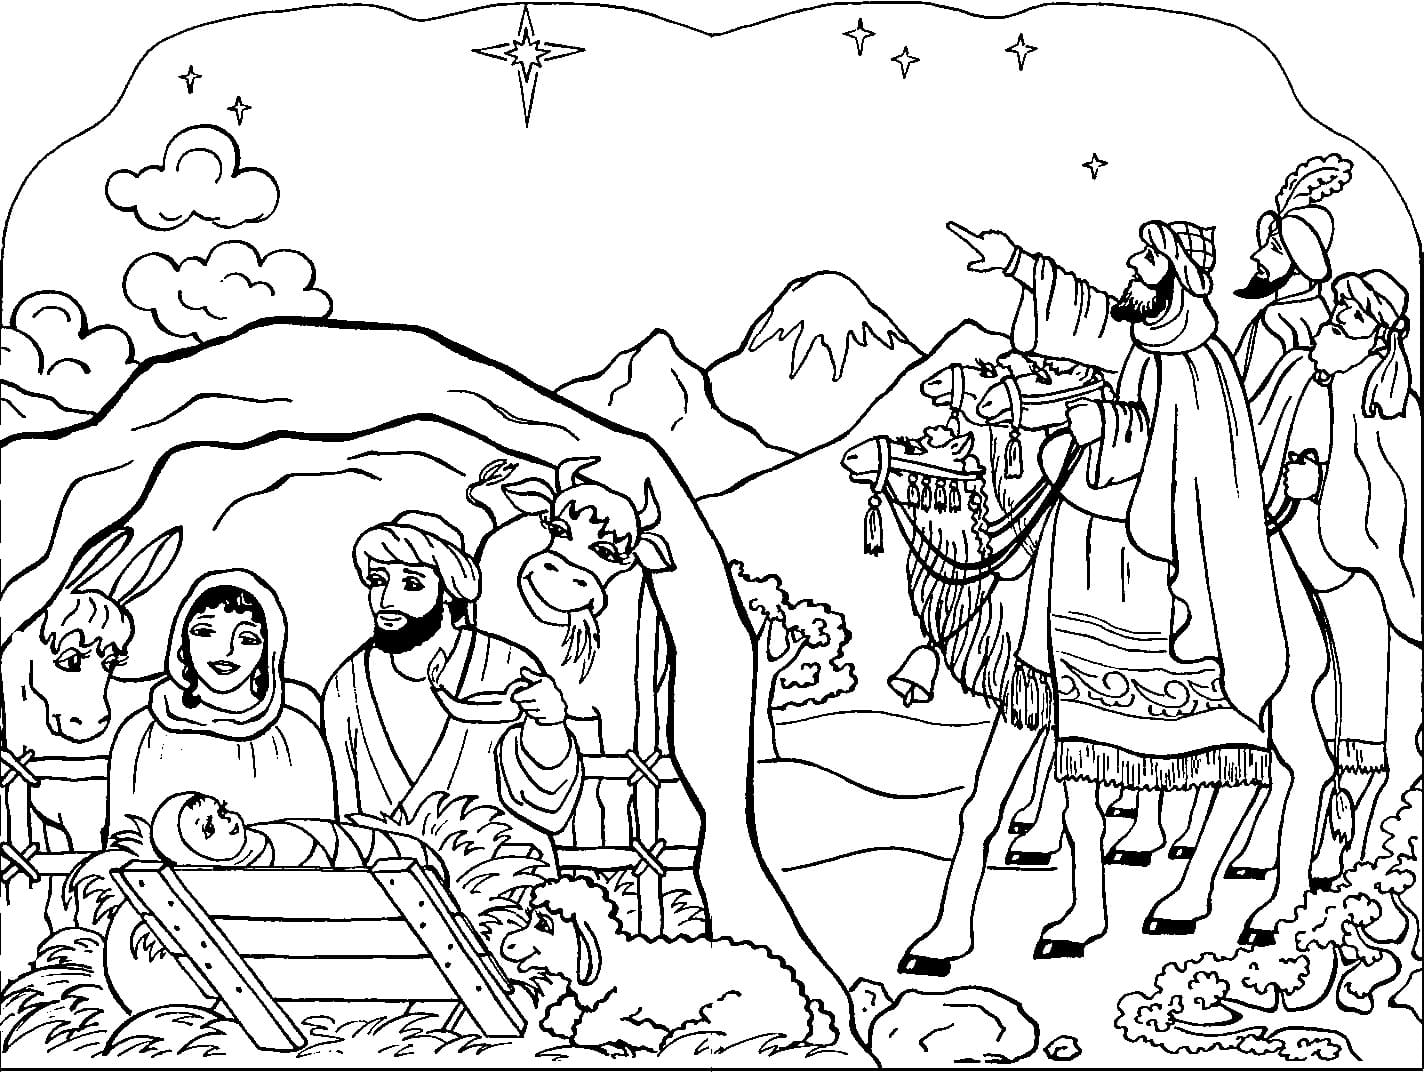 Printable Nativity Image For Kids Coloring Page